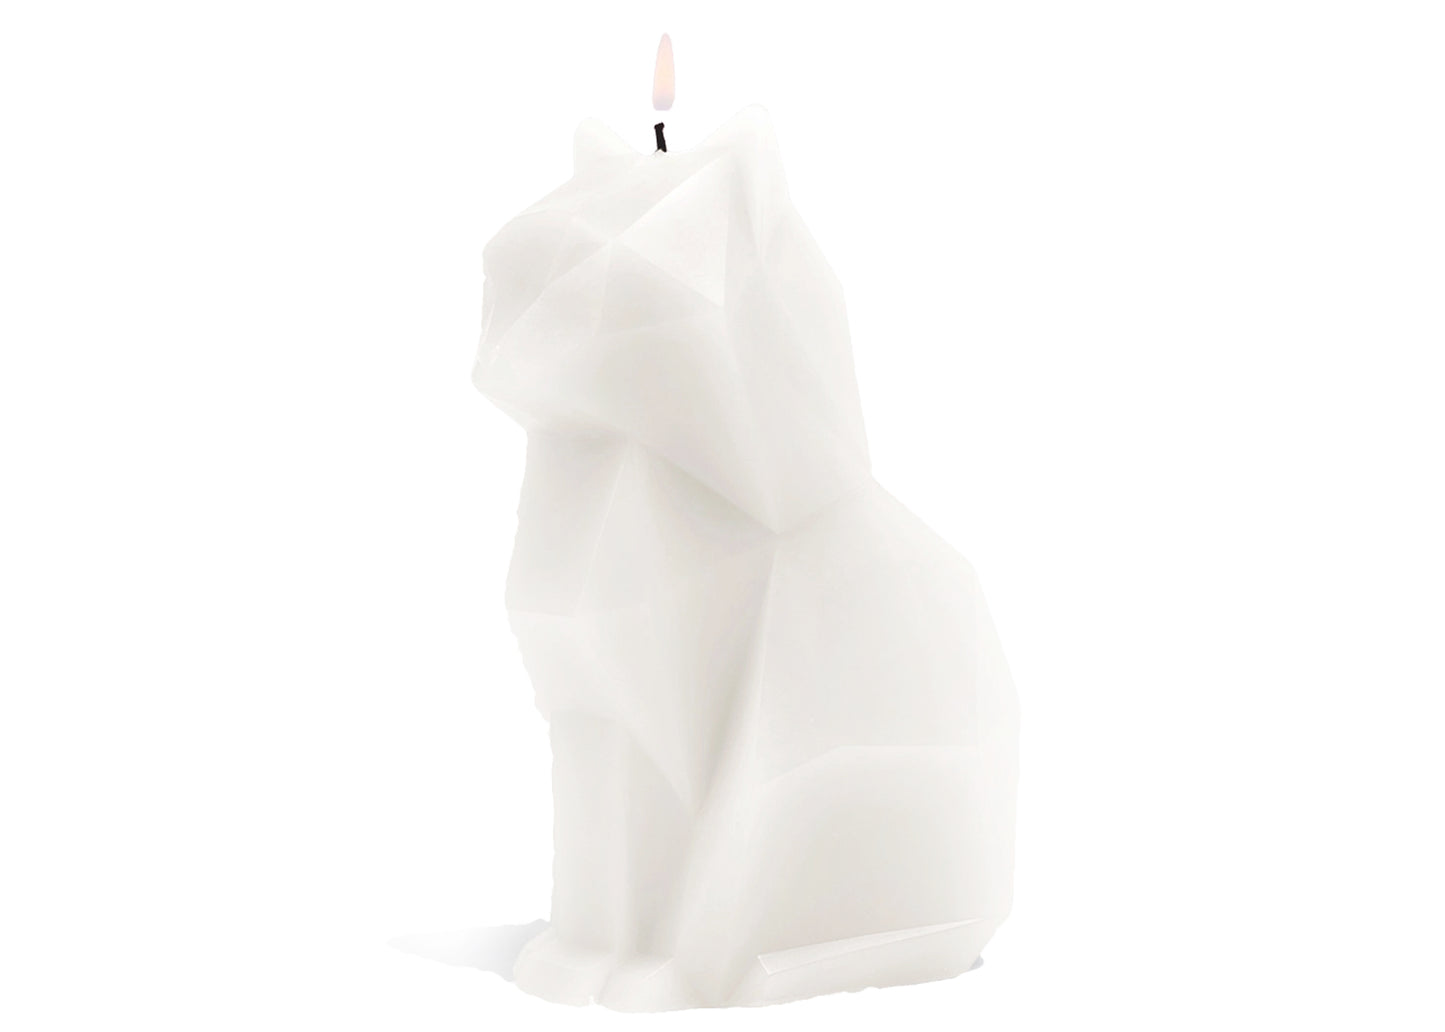 Kisa PyroPet Candle in White